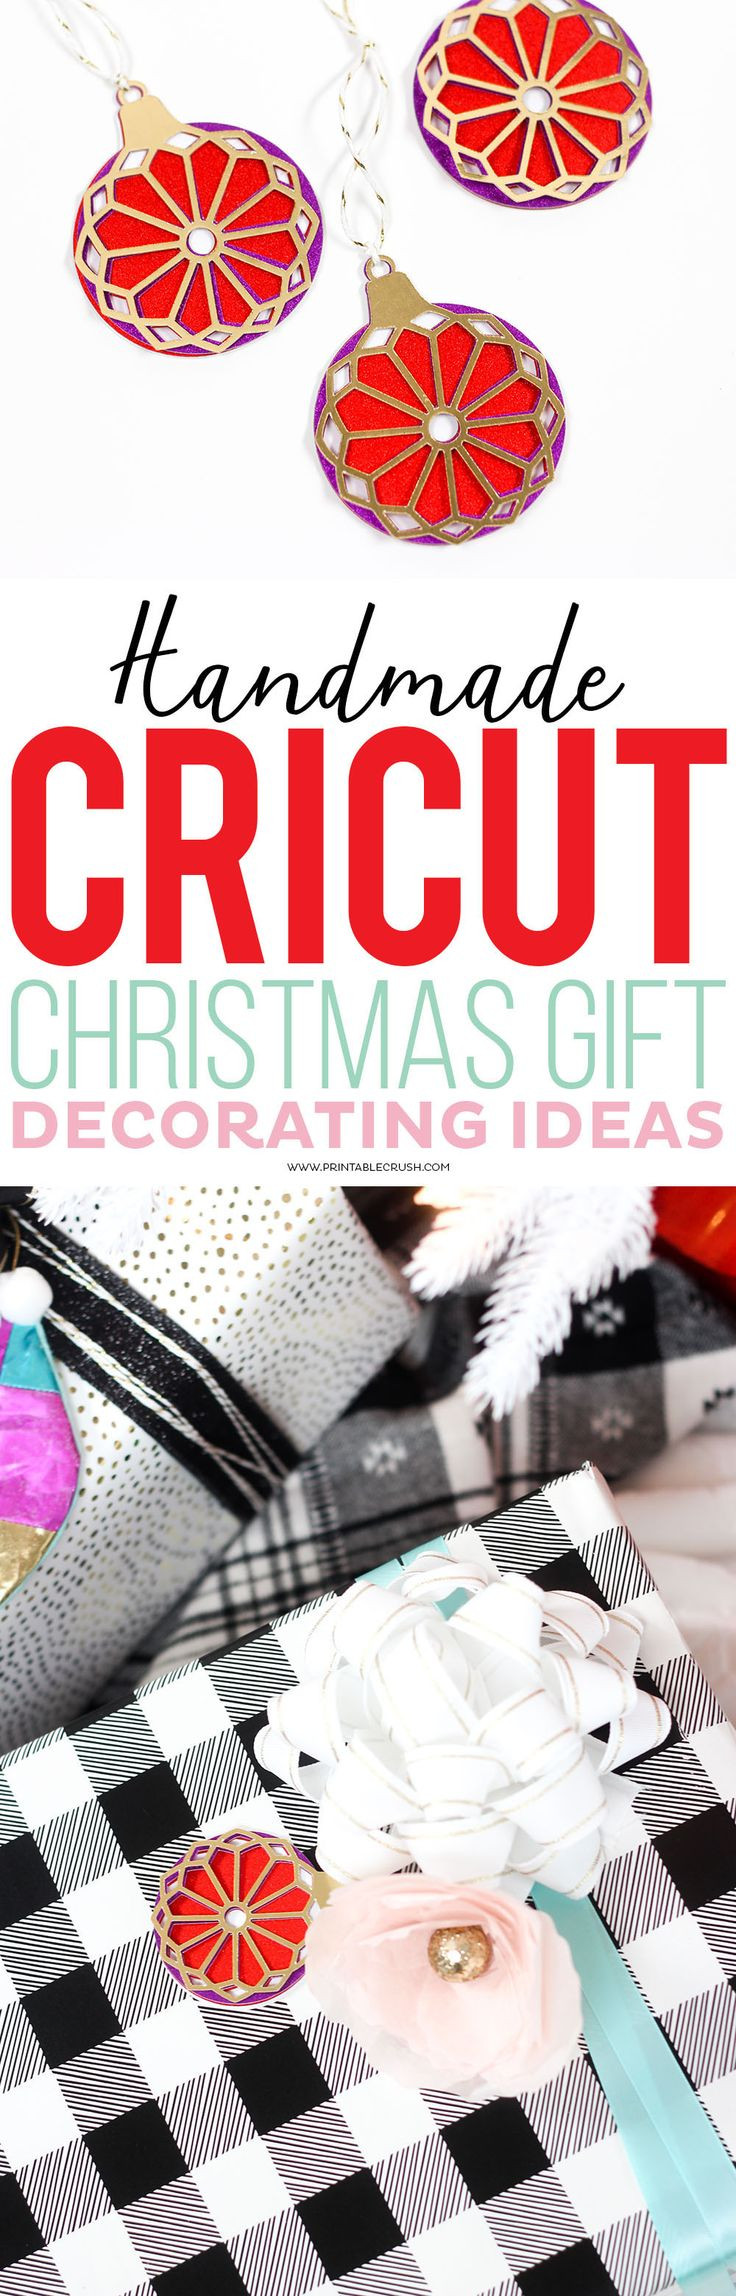 Cricut Christmas Gift Ideas
 7484 best Cricut Ideas from Bloggers and More images on